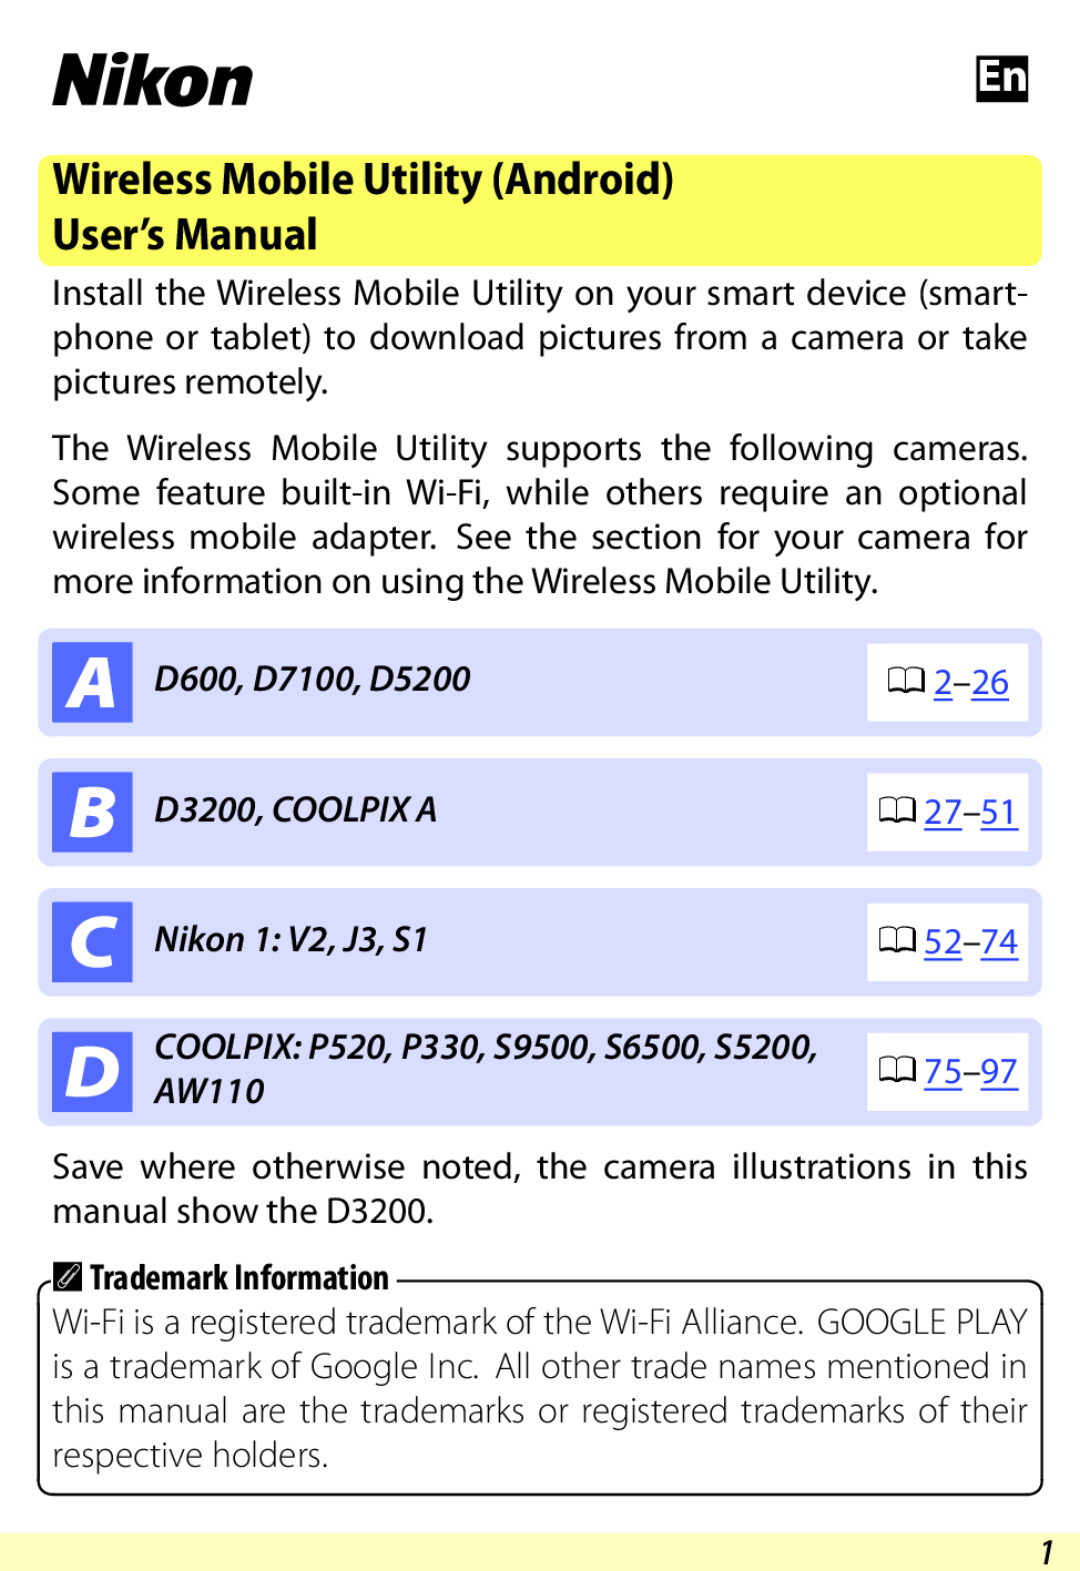 Nikon user manual Wireless Mobile Utility Android User’s Manual, A Trademark Information, D600, D7100, D5200, AW110 